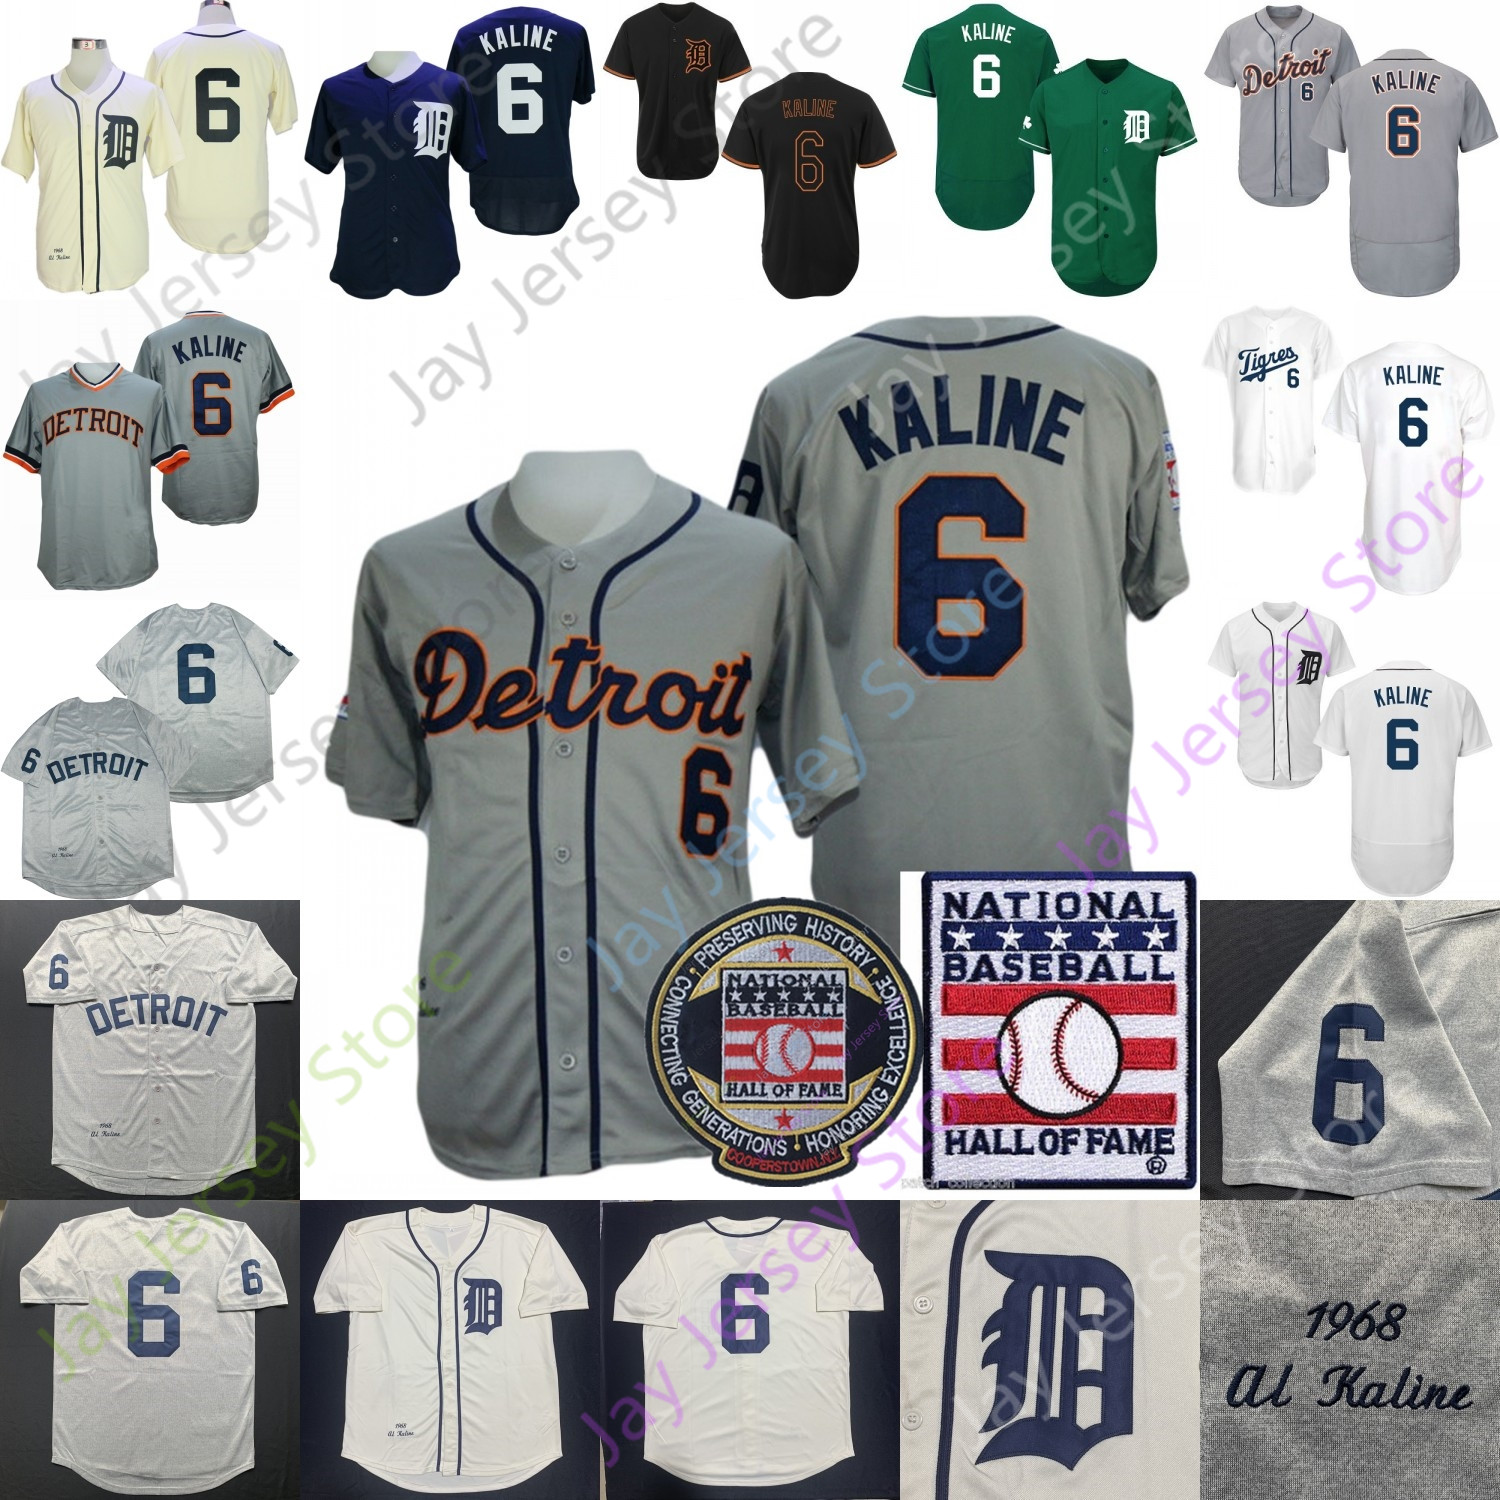 

Al Kaline Jersey 1968 Cream Cooperstown Grey Hall Of Fame Patch Green White Fans Player Black Fashion All Stitched Size S-3XL, White former